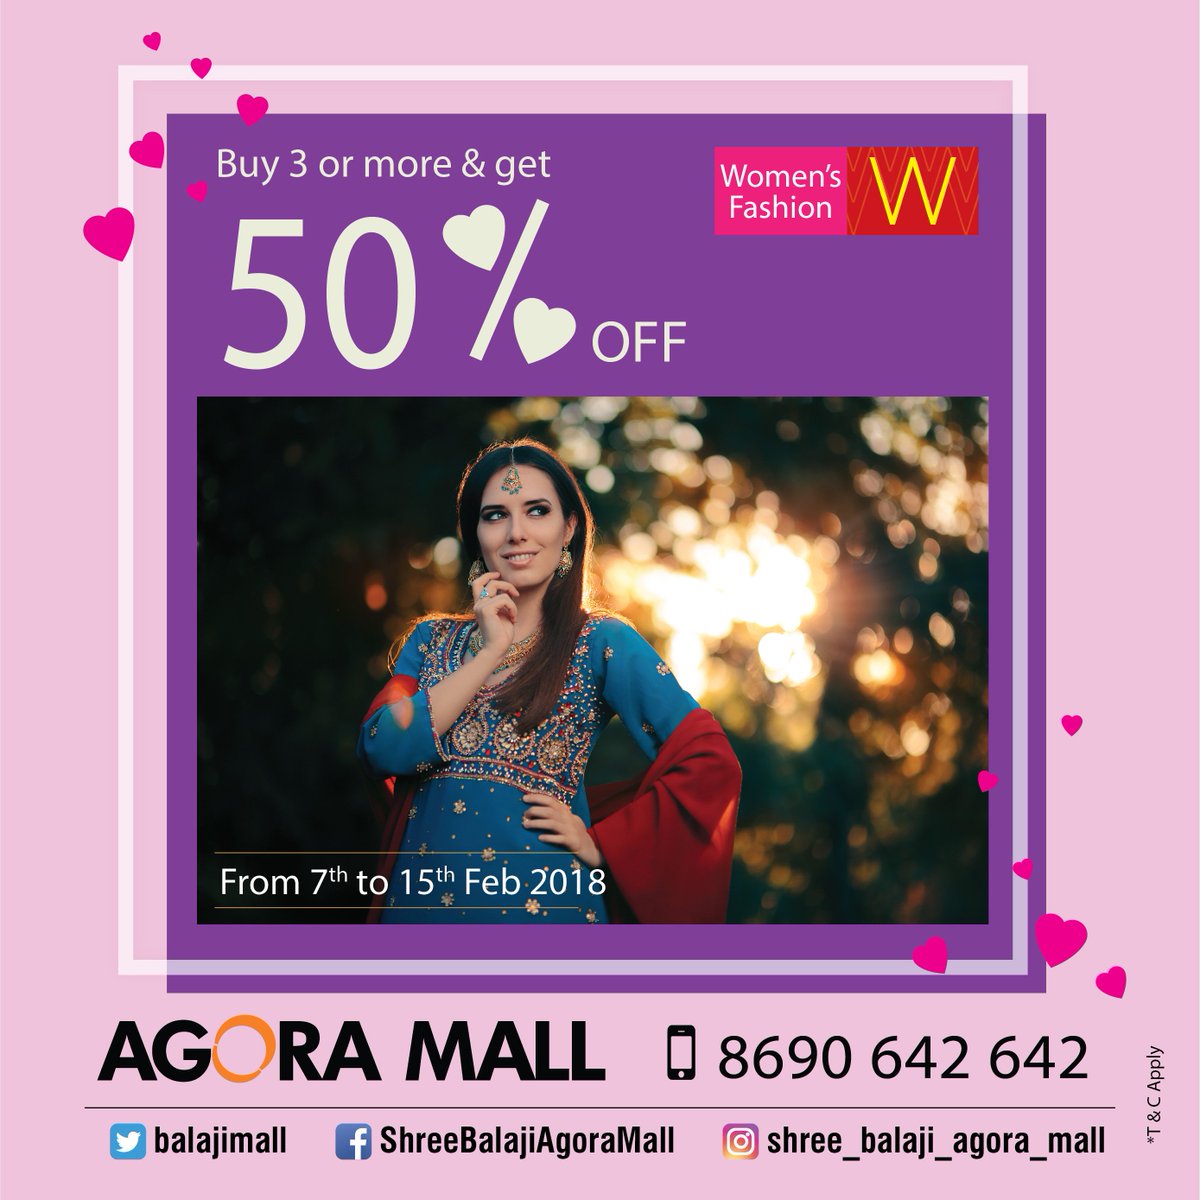 Can't Decide what your loved ones will #love to see you wearing, Then come to #ShreeBalajiAgora Mall and get upto 50% discounts on favourite brands of your loved ones. 

Call - 8690642642

#Valentinesday #ValentinesWeek #womensfashion #love #Ahmedabad #Gandhinagar #ClothesforGirl